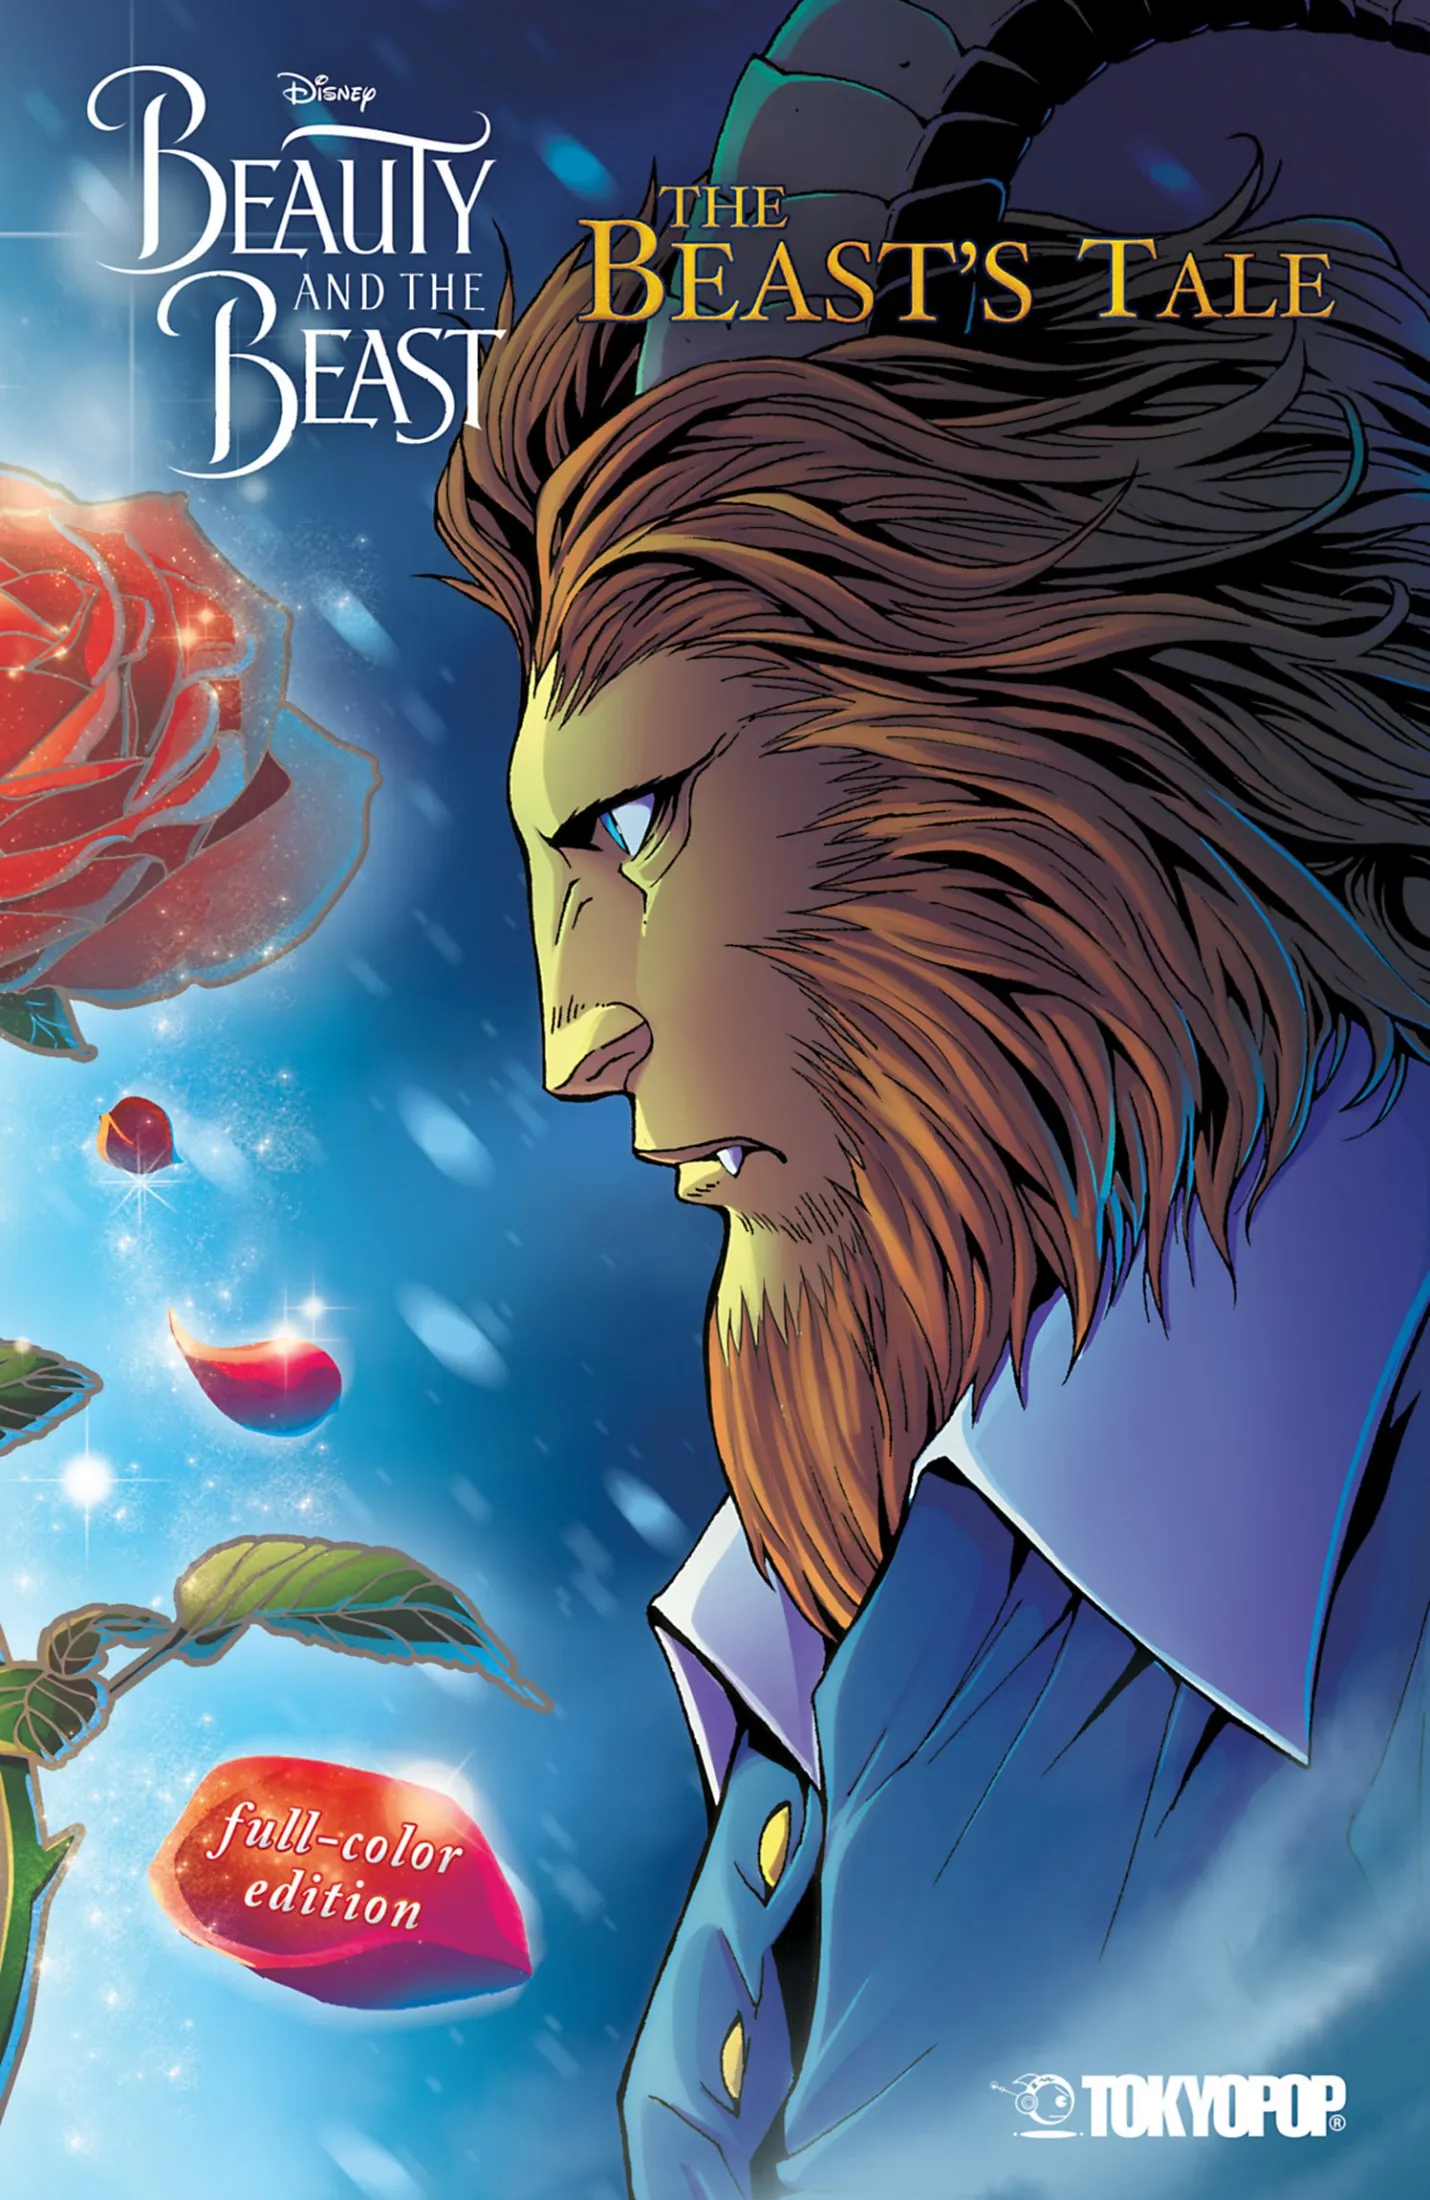 The Beast's Tale (Full-Color Edition) (Disney Manga: Beauty and the Beast)